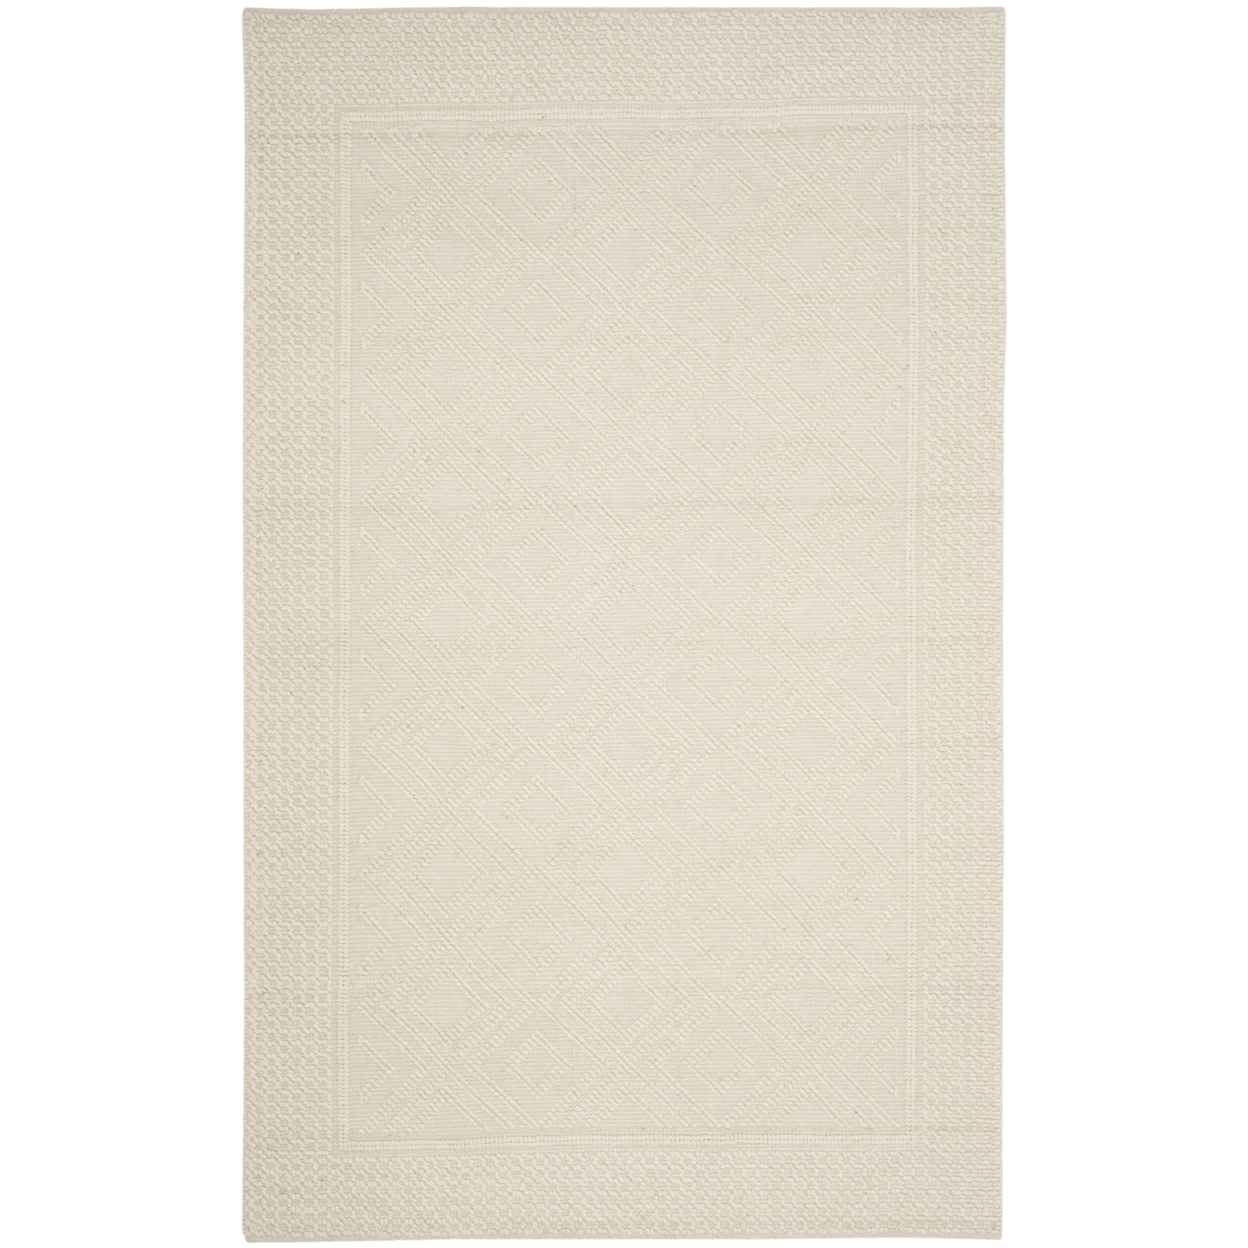 SAFAVIEH Vermont Collection VRM212A Handwoven Ivory Rug - 10' Square